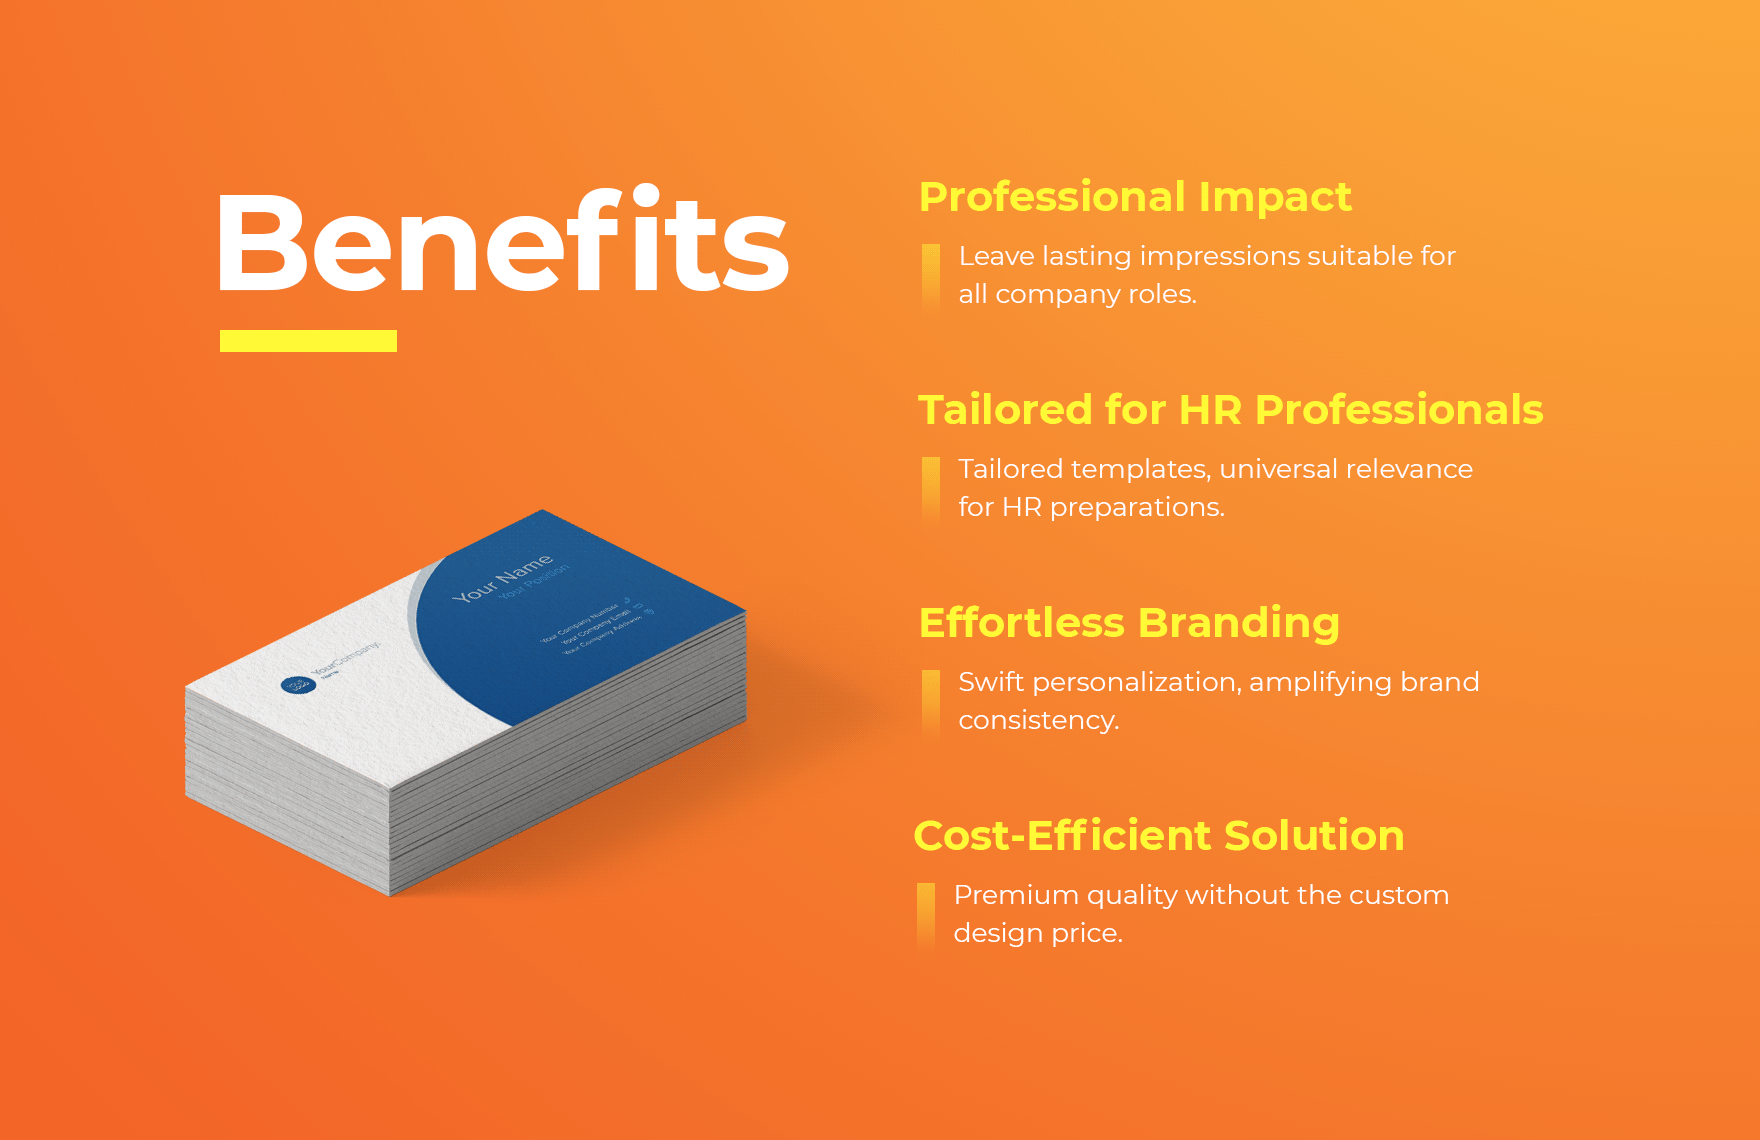 Quality Assurance Specialist Business Card Template